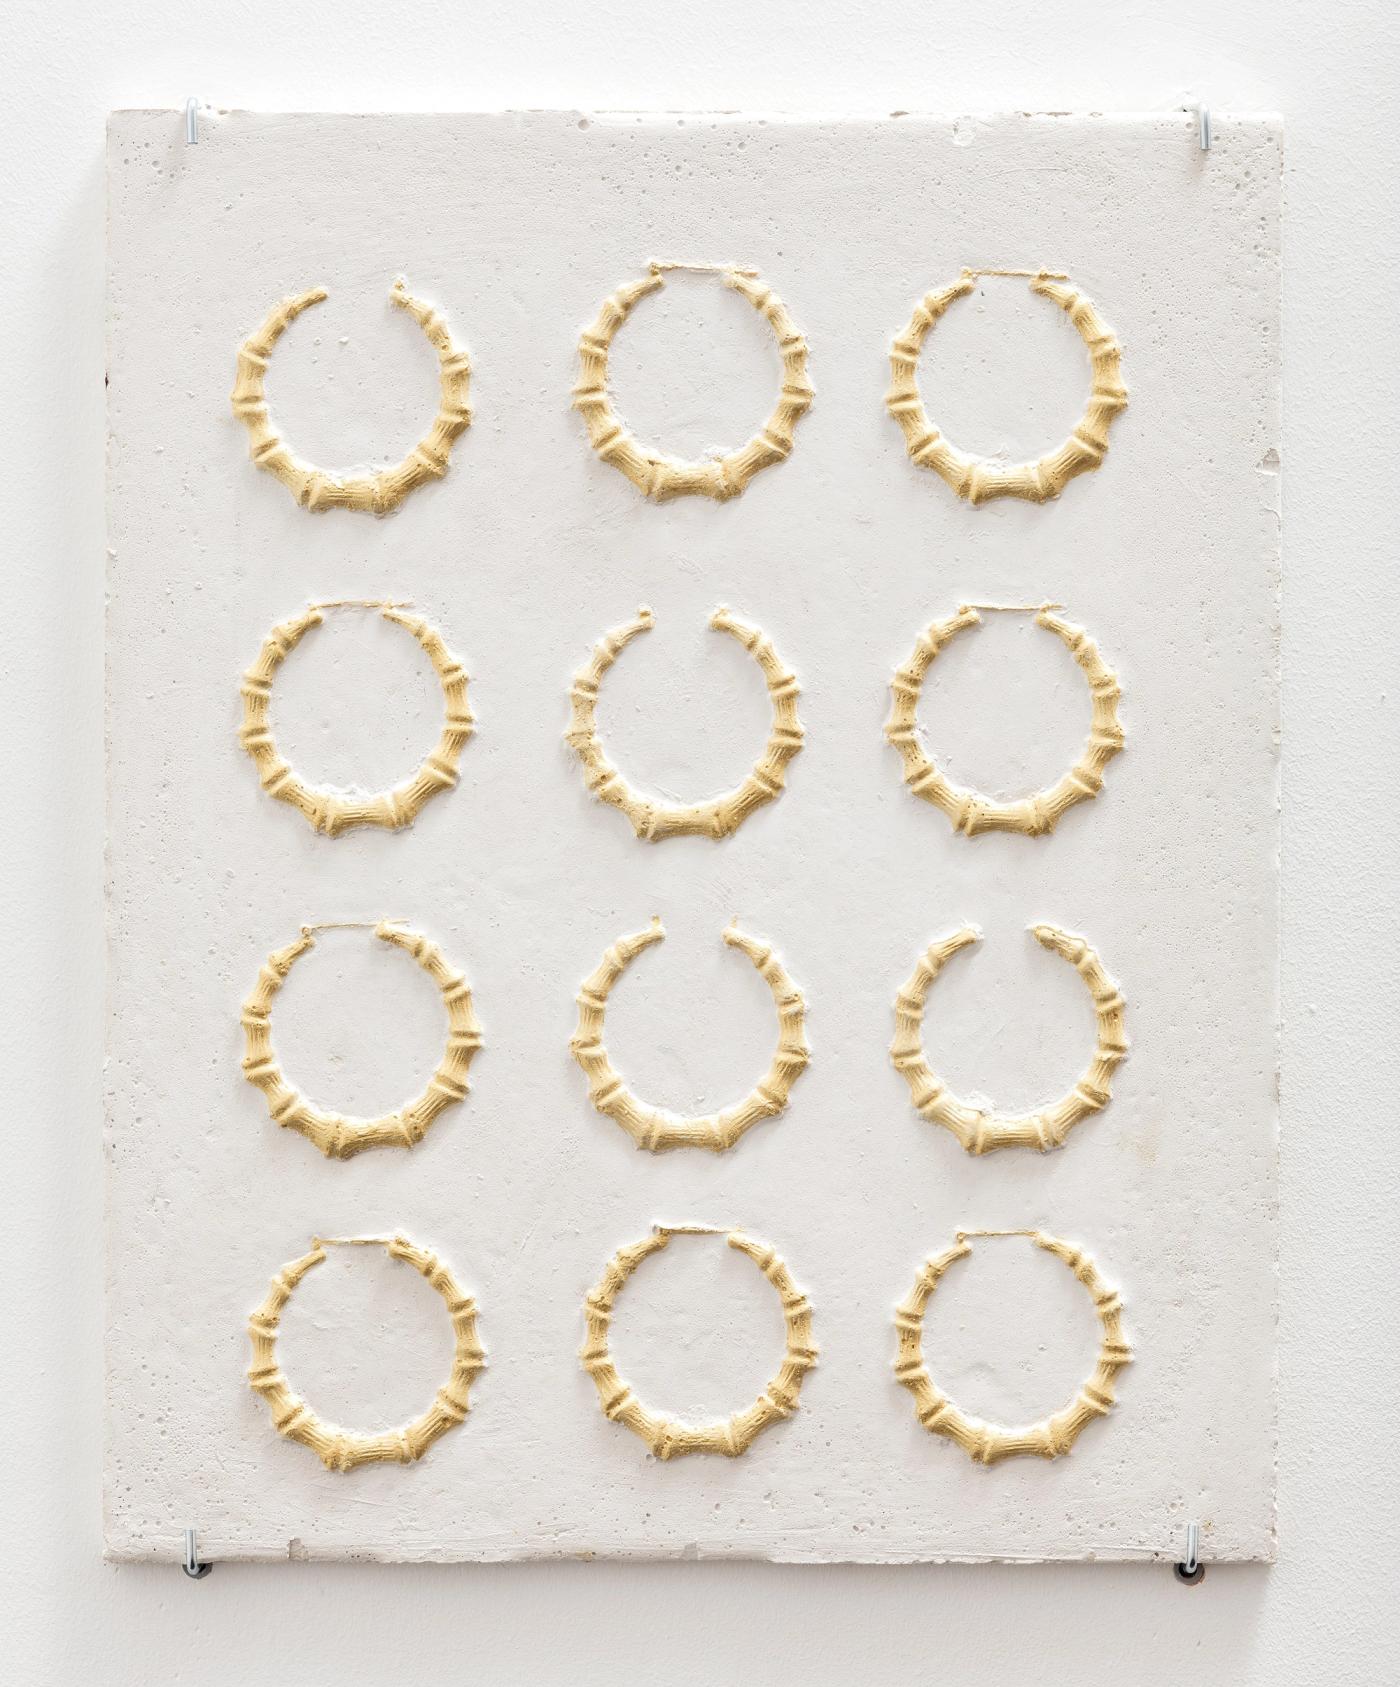 Image of Gold Round Bamboo Earrings Relief, 2018: Plaster and acrylic